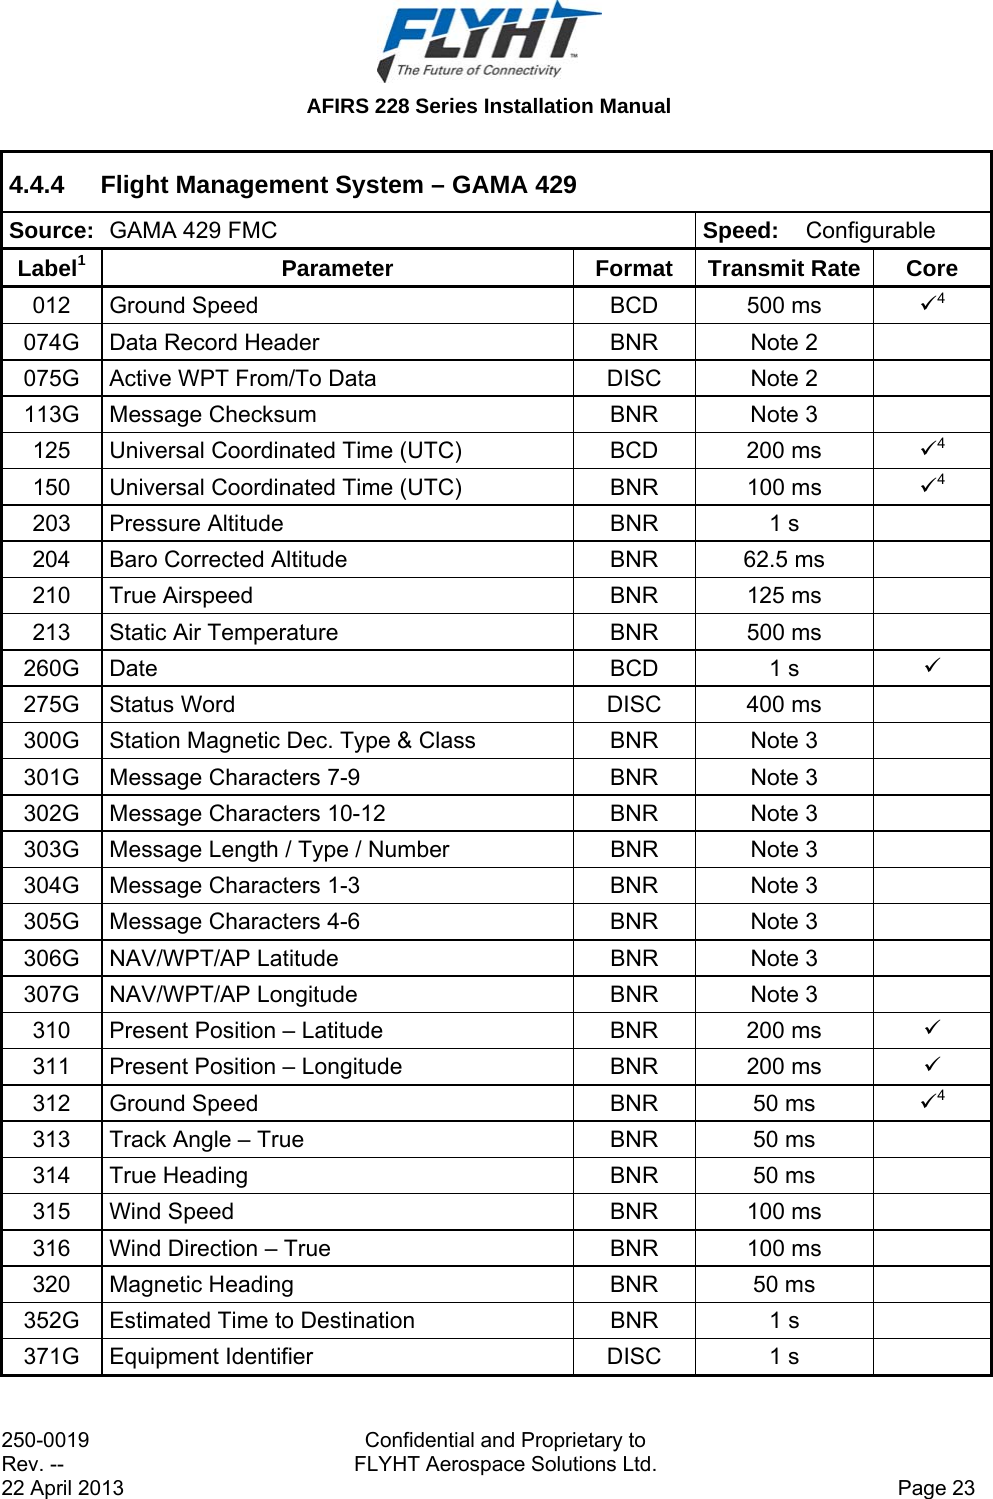  AFIRS 228 Series Installation Manual 250-0019  Confidential and Proprietary to Rev. --  FLYHT Aerospace Solutions Ltd. 22 April 2013    Page 23 4.4.4  Flight Management System – GAMA 429 Source:  GAMA 429 FMC  Speed:  Configurable Label1 Parameter  Format Transmit Rate Core 012  Ground Speed  BCD  500 ms  4 074G  Data Record Header  BNR  Note 2   075G  Active WPT From/To Data  DISC  Note 2   113G  Message Checksum  BNR  Note 3   125  Universal Coordinated Time (UTC)  BCD  200 ms  4 150  Universal Coordinated Time (UTC)  BNR  100 ms  4 203  Pressure Altitude  BNR  1 s   204  Baro Corrected Altitude  BNR  62.5 ms   210  True Airspeed  BNR  125 ms   213  Static Air Temperature  BNR  500 ms   260G Date  BCD  1 s   275G  Status Word  DISC  400 ms   300G  Station Magnetic Dec. Type &amp; Class  BNR  Note 3   301G  Message Characters 7-9  BNR  Note 3   302G  Message Characters 10-12  BNR  Note 3   303G  Message Length / Type / Number  BNR  Note 3   304G  Message Characters 1-3  BNR  Note 3   305G  Message Characters 4-6  BNR  Note 3   306G  NAV/WPT/AP Latitude  BNR  Note 3   307G  NAV/WPT/AP Longitude  BNR  Note 3   310  Present Position – Latitude  BNR  200 ms   311  Present Position – Longitude  BNR  200 ms   312  Ground Speed  BNR  50 ms  4 313  Track Angle – True  BNR  50 ms   314  True Heading  BNR  50 ms   315  Wind Speed  BNR  100 ms   316  Wind Direction – True  BNR  100 ms   320  Magnetic Heading  BNR  50 ms   352G  Estimated Time to Destination  BNR  1 s   371G  Equipment Identifier  DISC  1 s   